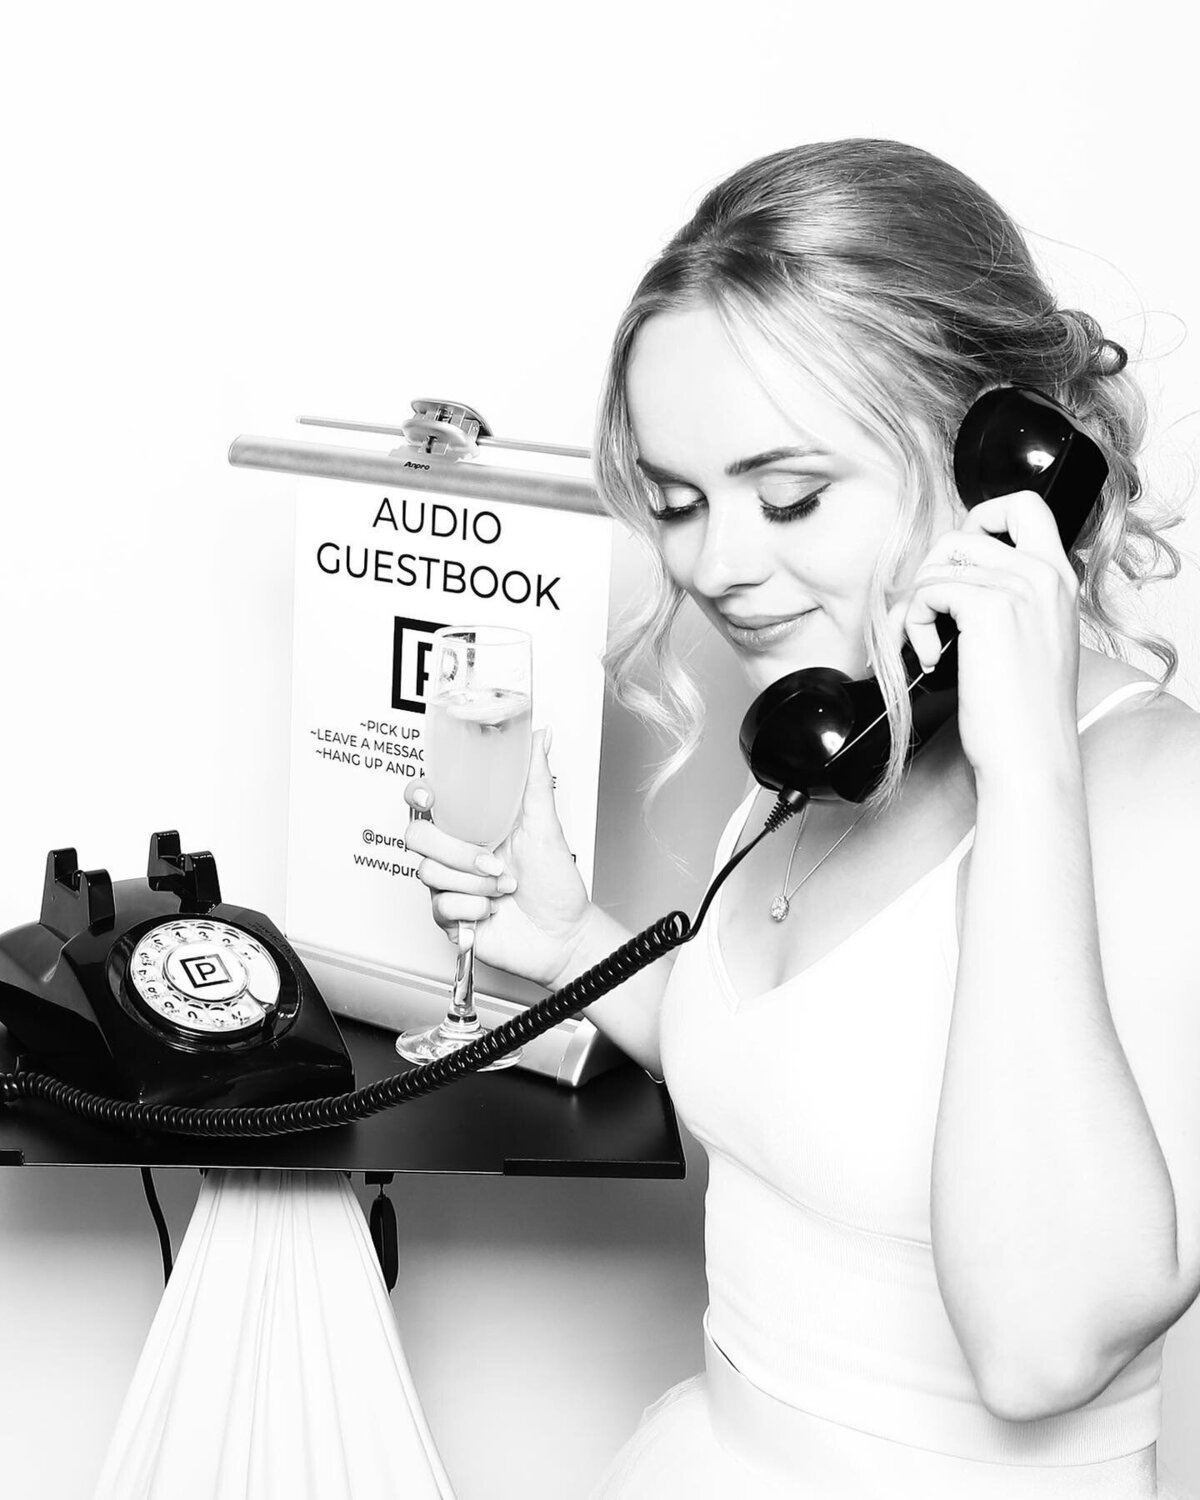 Audio guestbook by Pure Portrait Photobooth & Phone Guest Book, timeless and fun wedding rentals based in Calgary, AB. Featured on the Brontë Bride Vendor Guide.